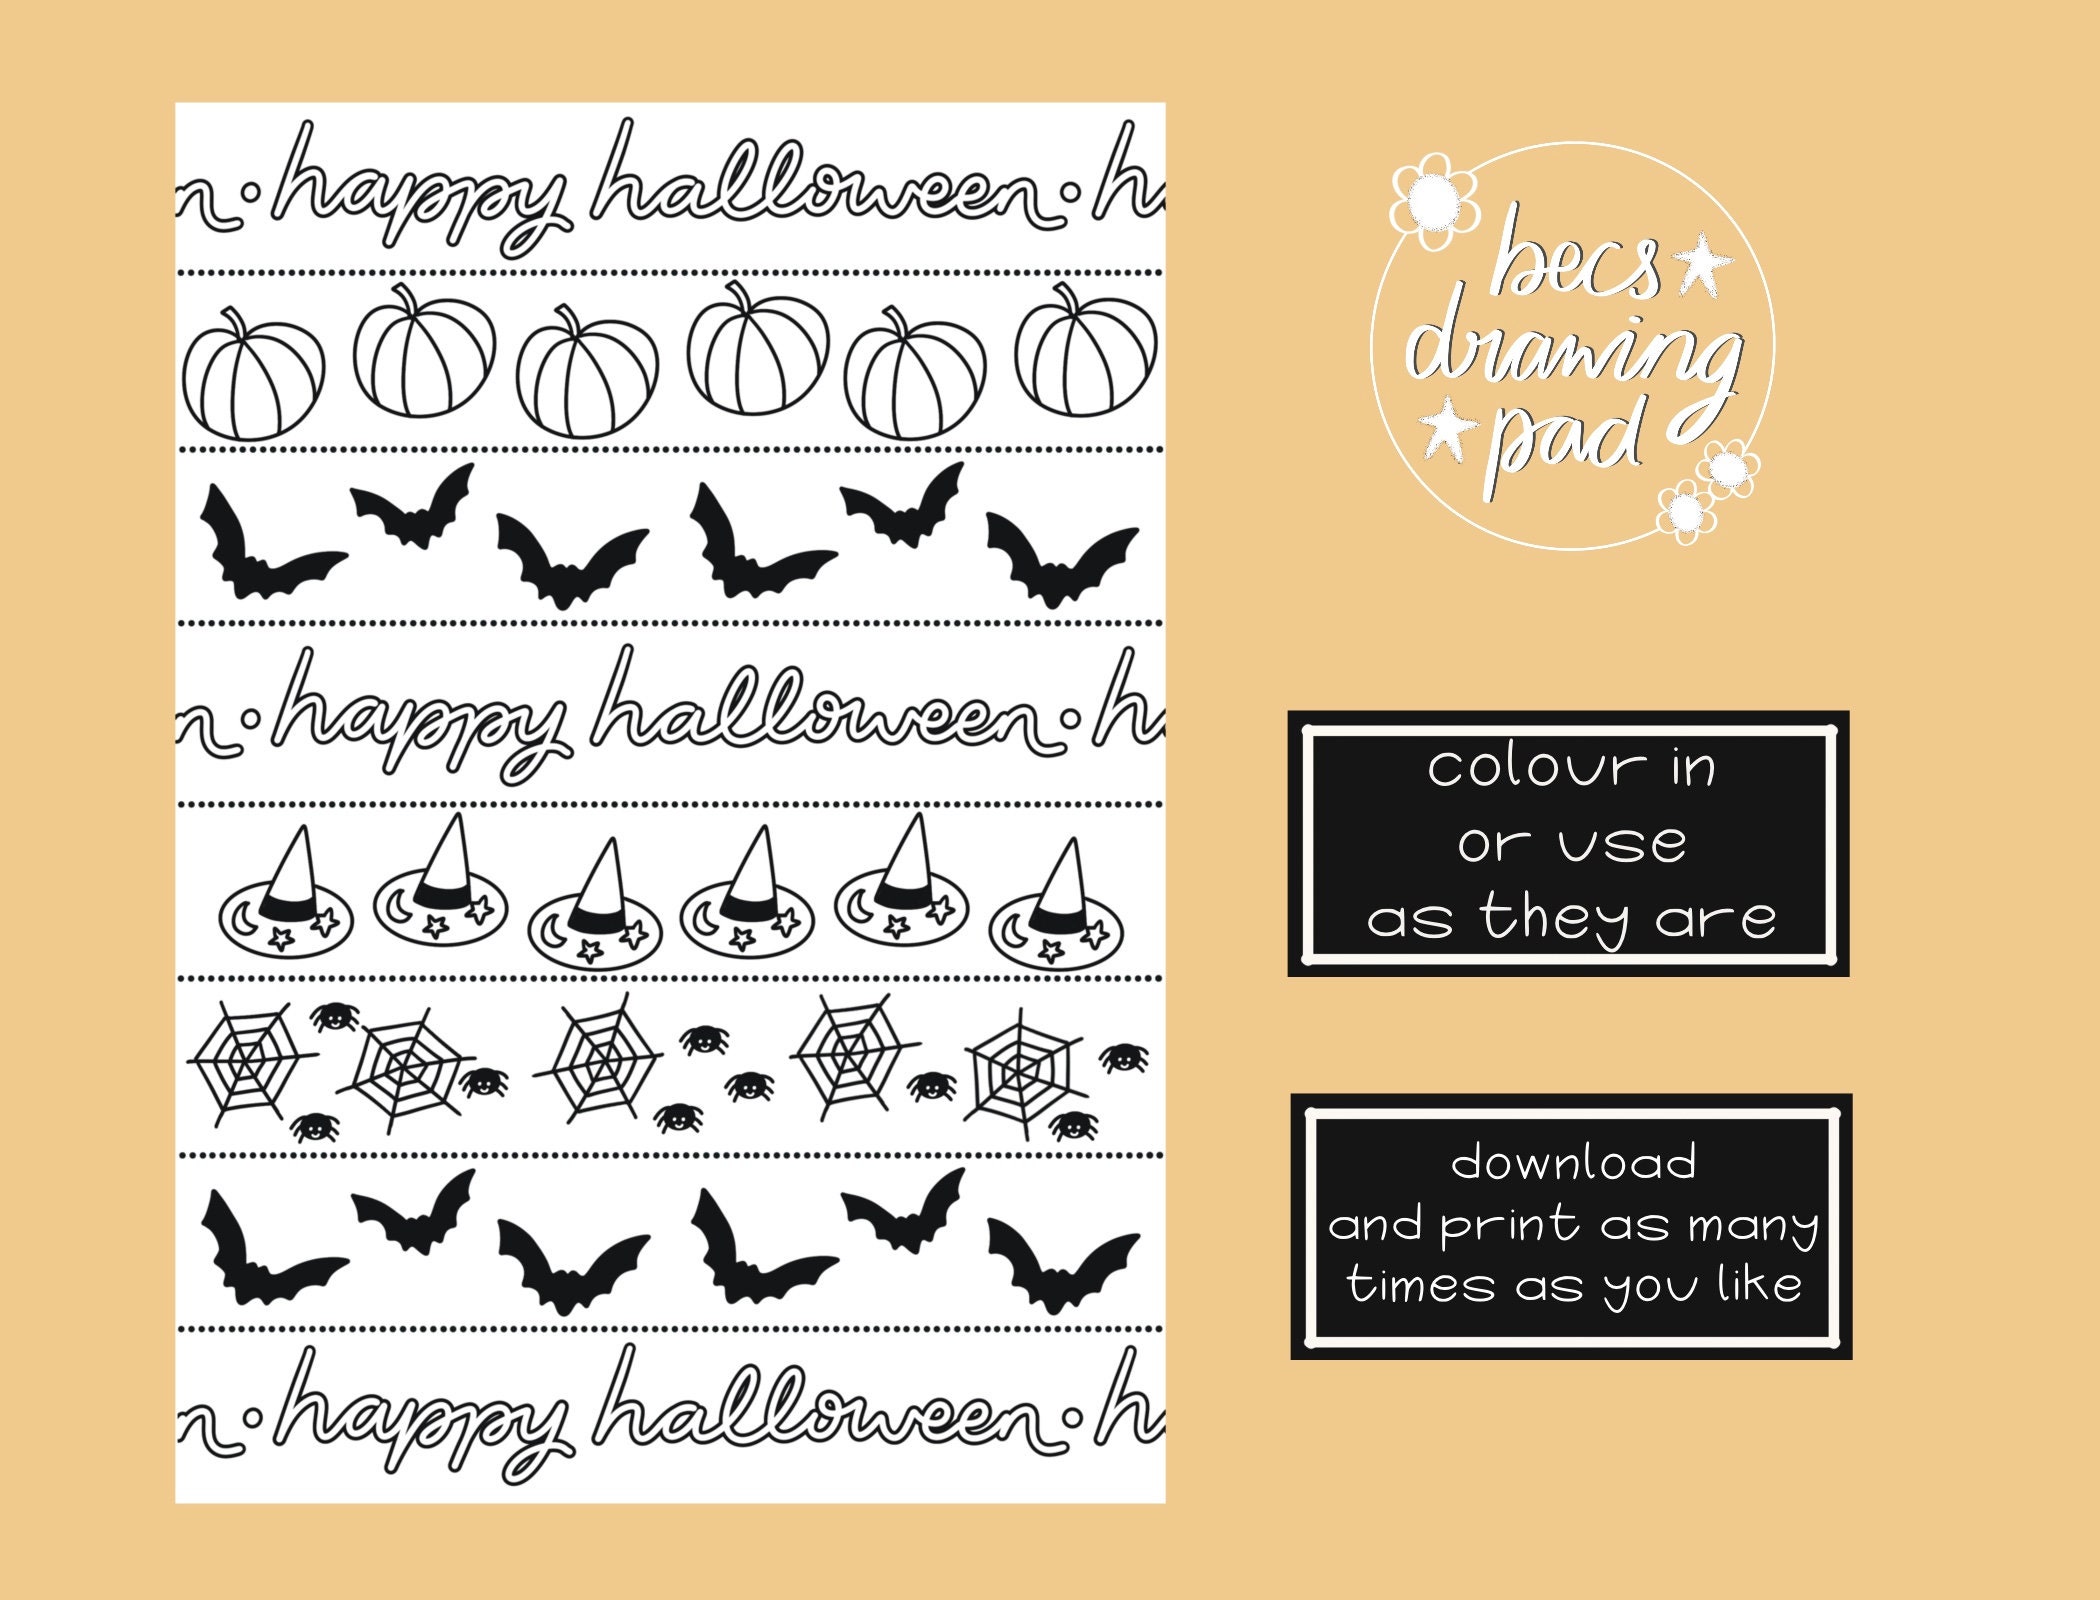 Printable colour in halloween paper chains print at home party decorations